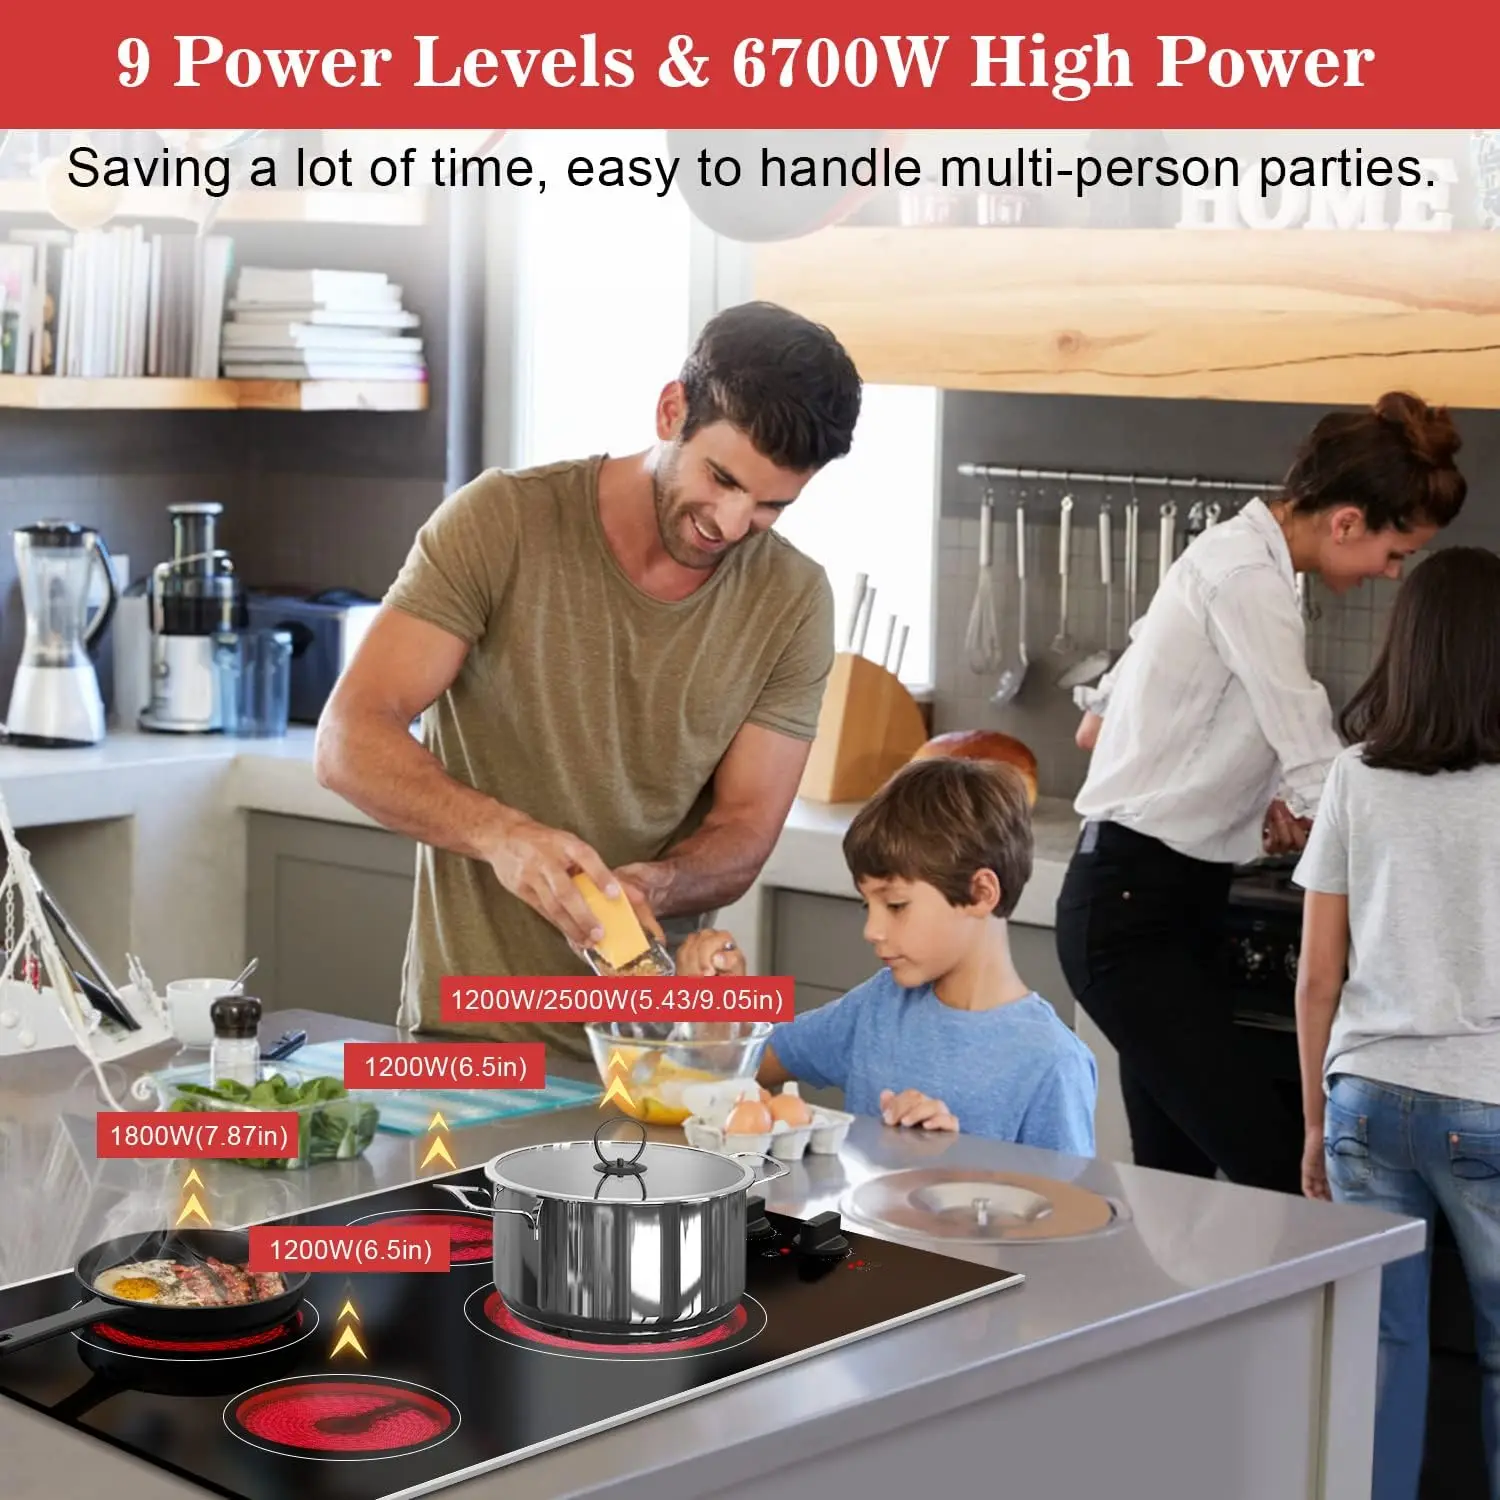 

30" electric cooktop 4 burners, built-in ceramic cooktop, 30" radiant electric cooktop, glass protected metal frame